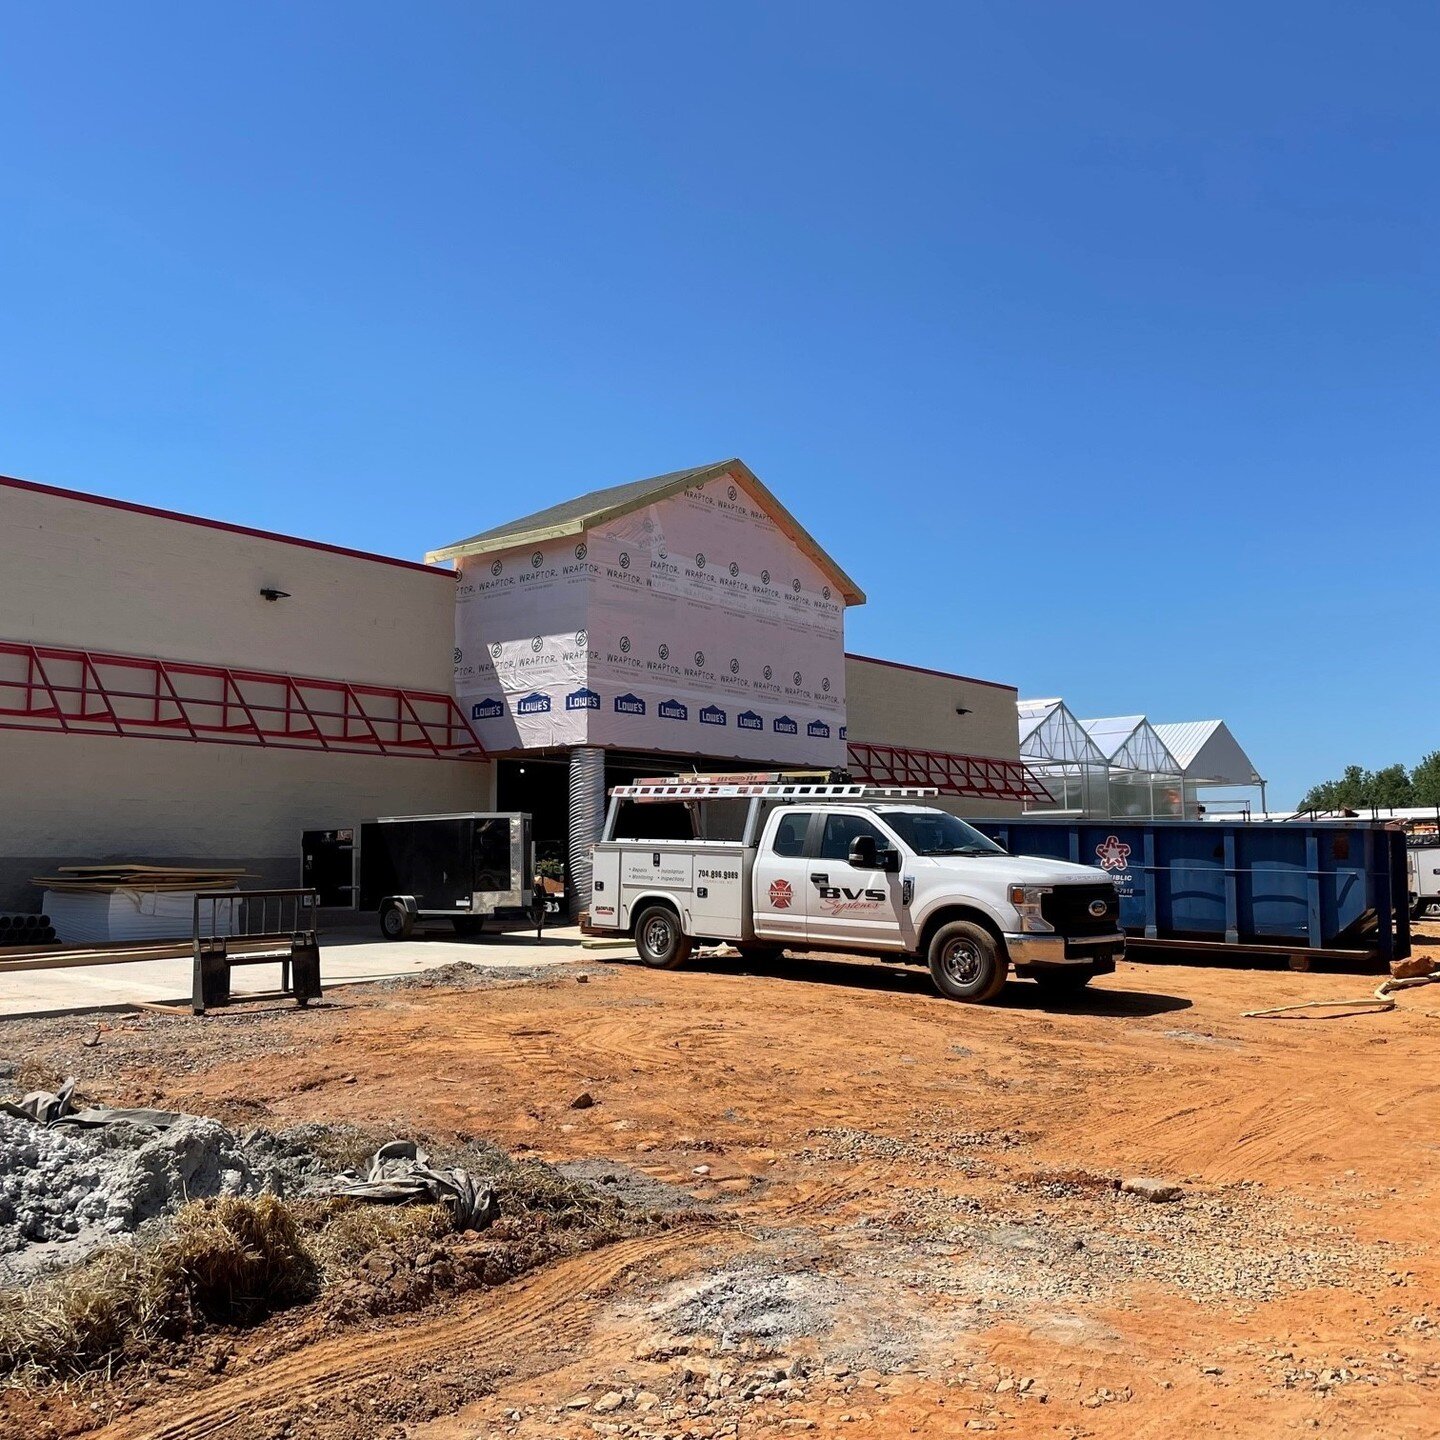 The @tractorsupply in Shelby, North Carolina is coming together 
#tractorsupply #wrnewmangeneralcontractor #generalcontractor #buildtosuit #constructionmanagement